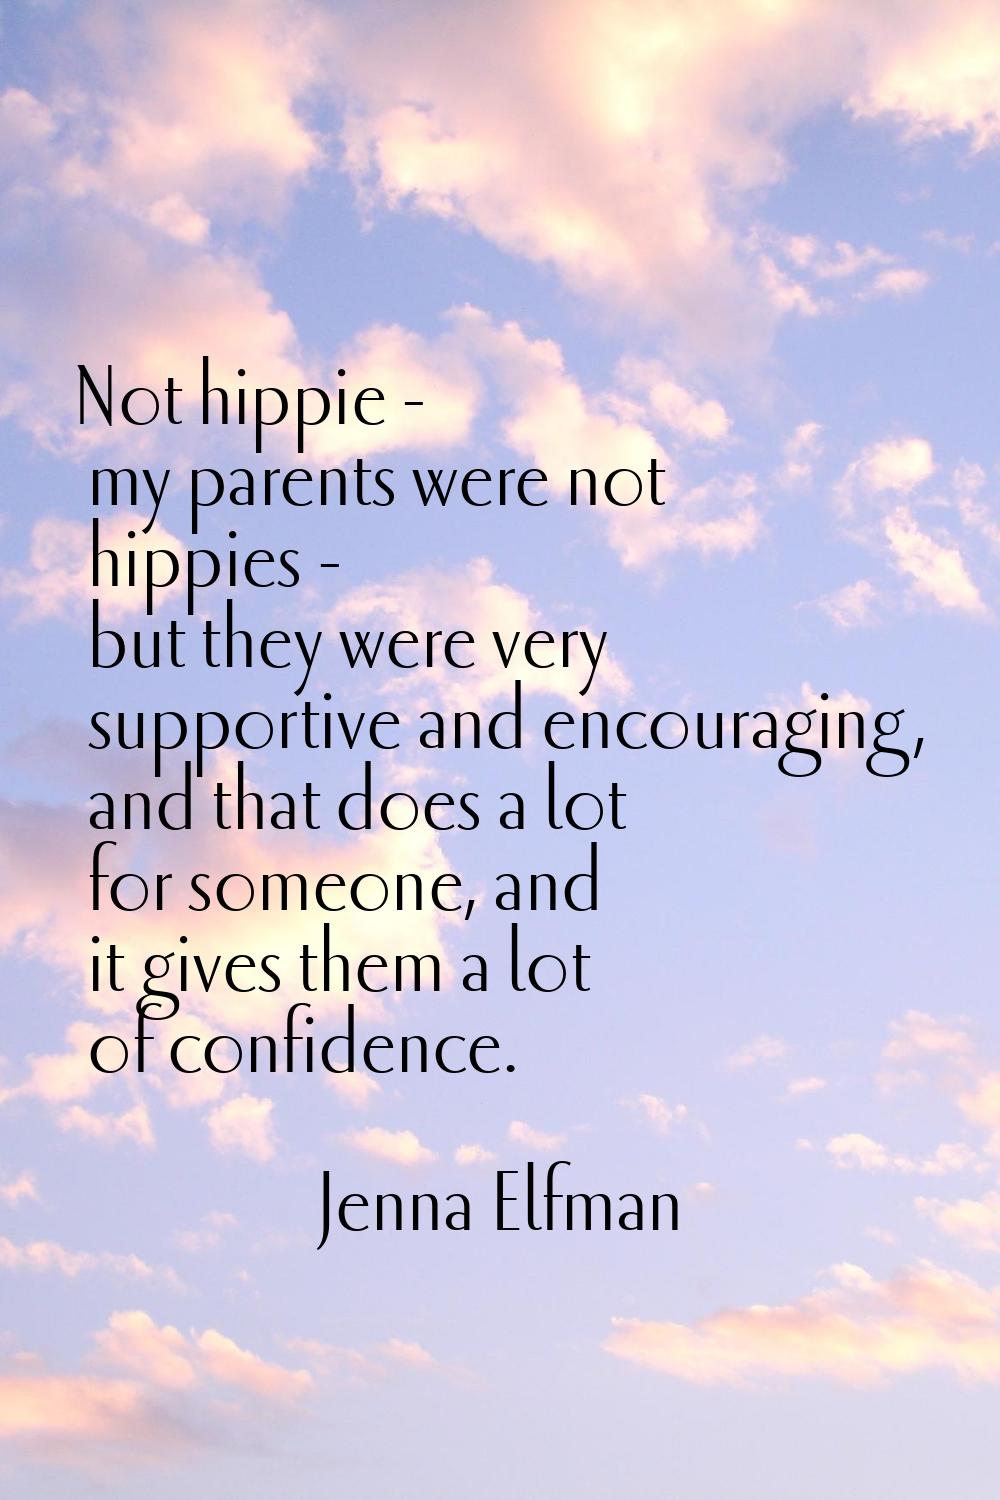 Not hippie - my parents were not hippies - but they were very supportive and encouraging, and that 